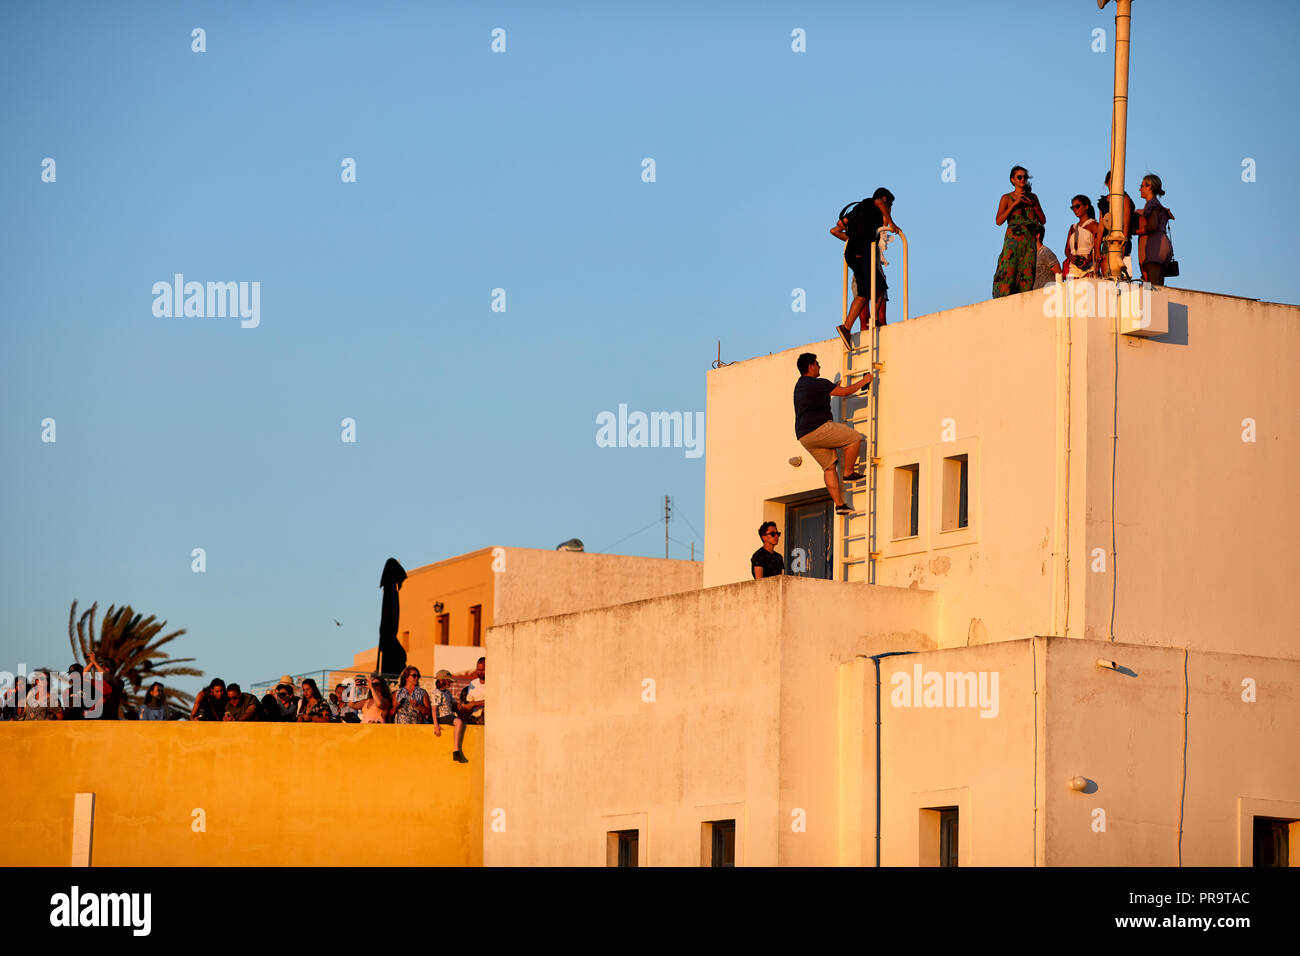 climbing on roof tops getting the best view of the sunset at  Oia landmark windmills Santorini, a Cyclades group of islands in Greece, tourists walkin Stock Photo